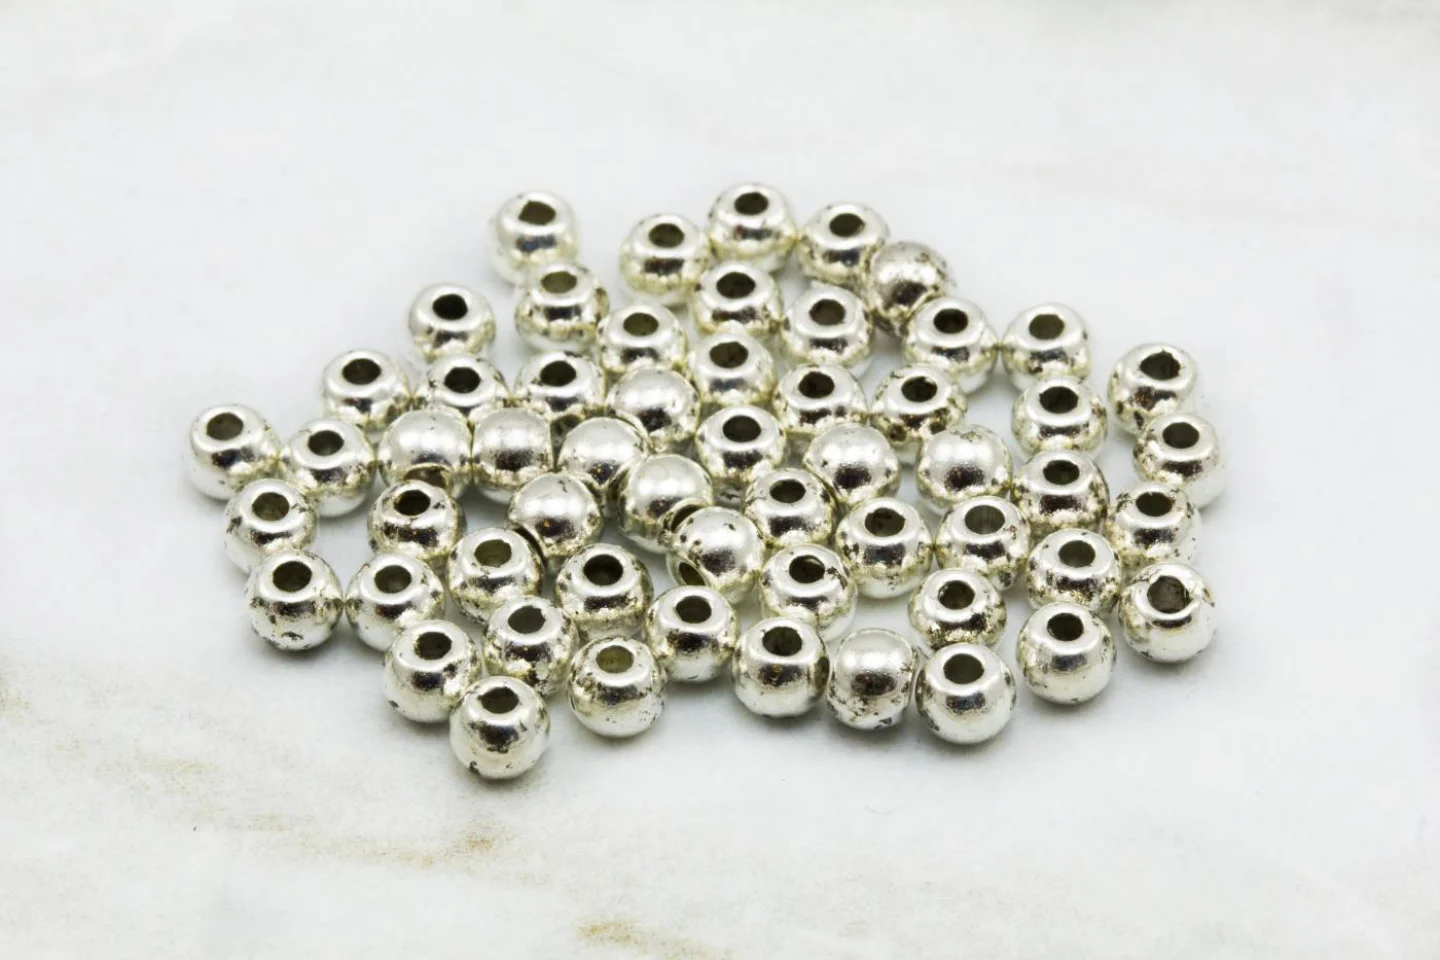 4mm-metal-ball-spacer-bead-charm-finding.